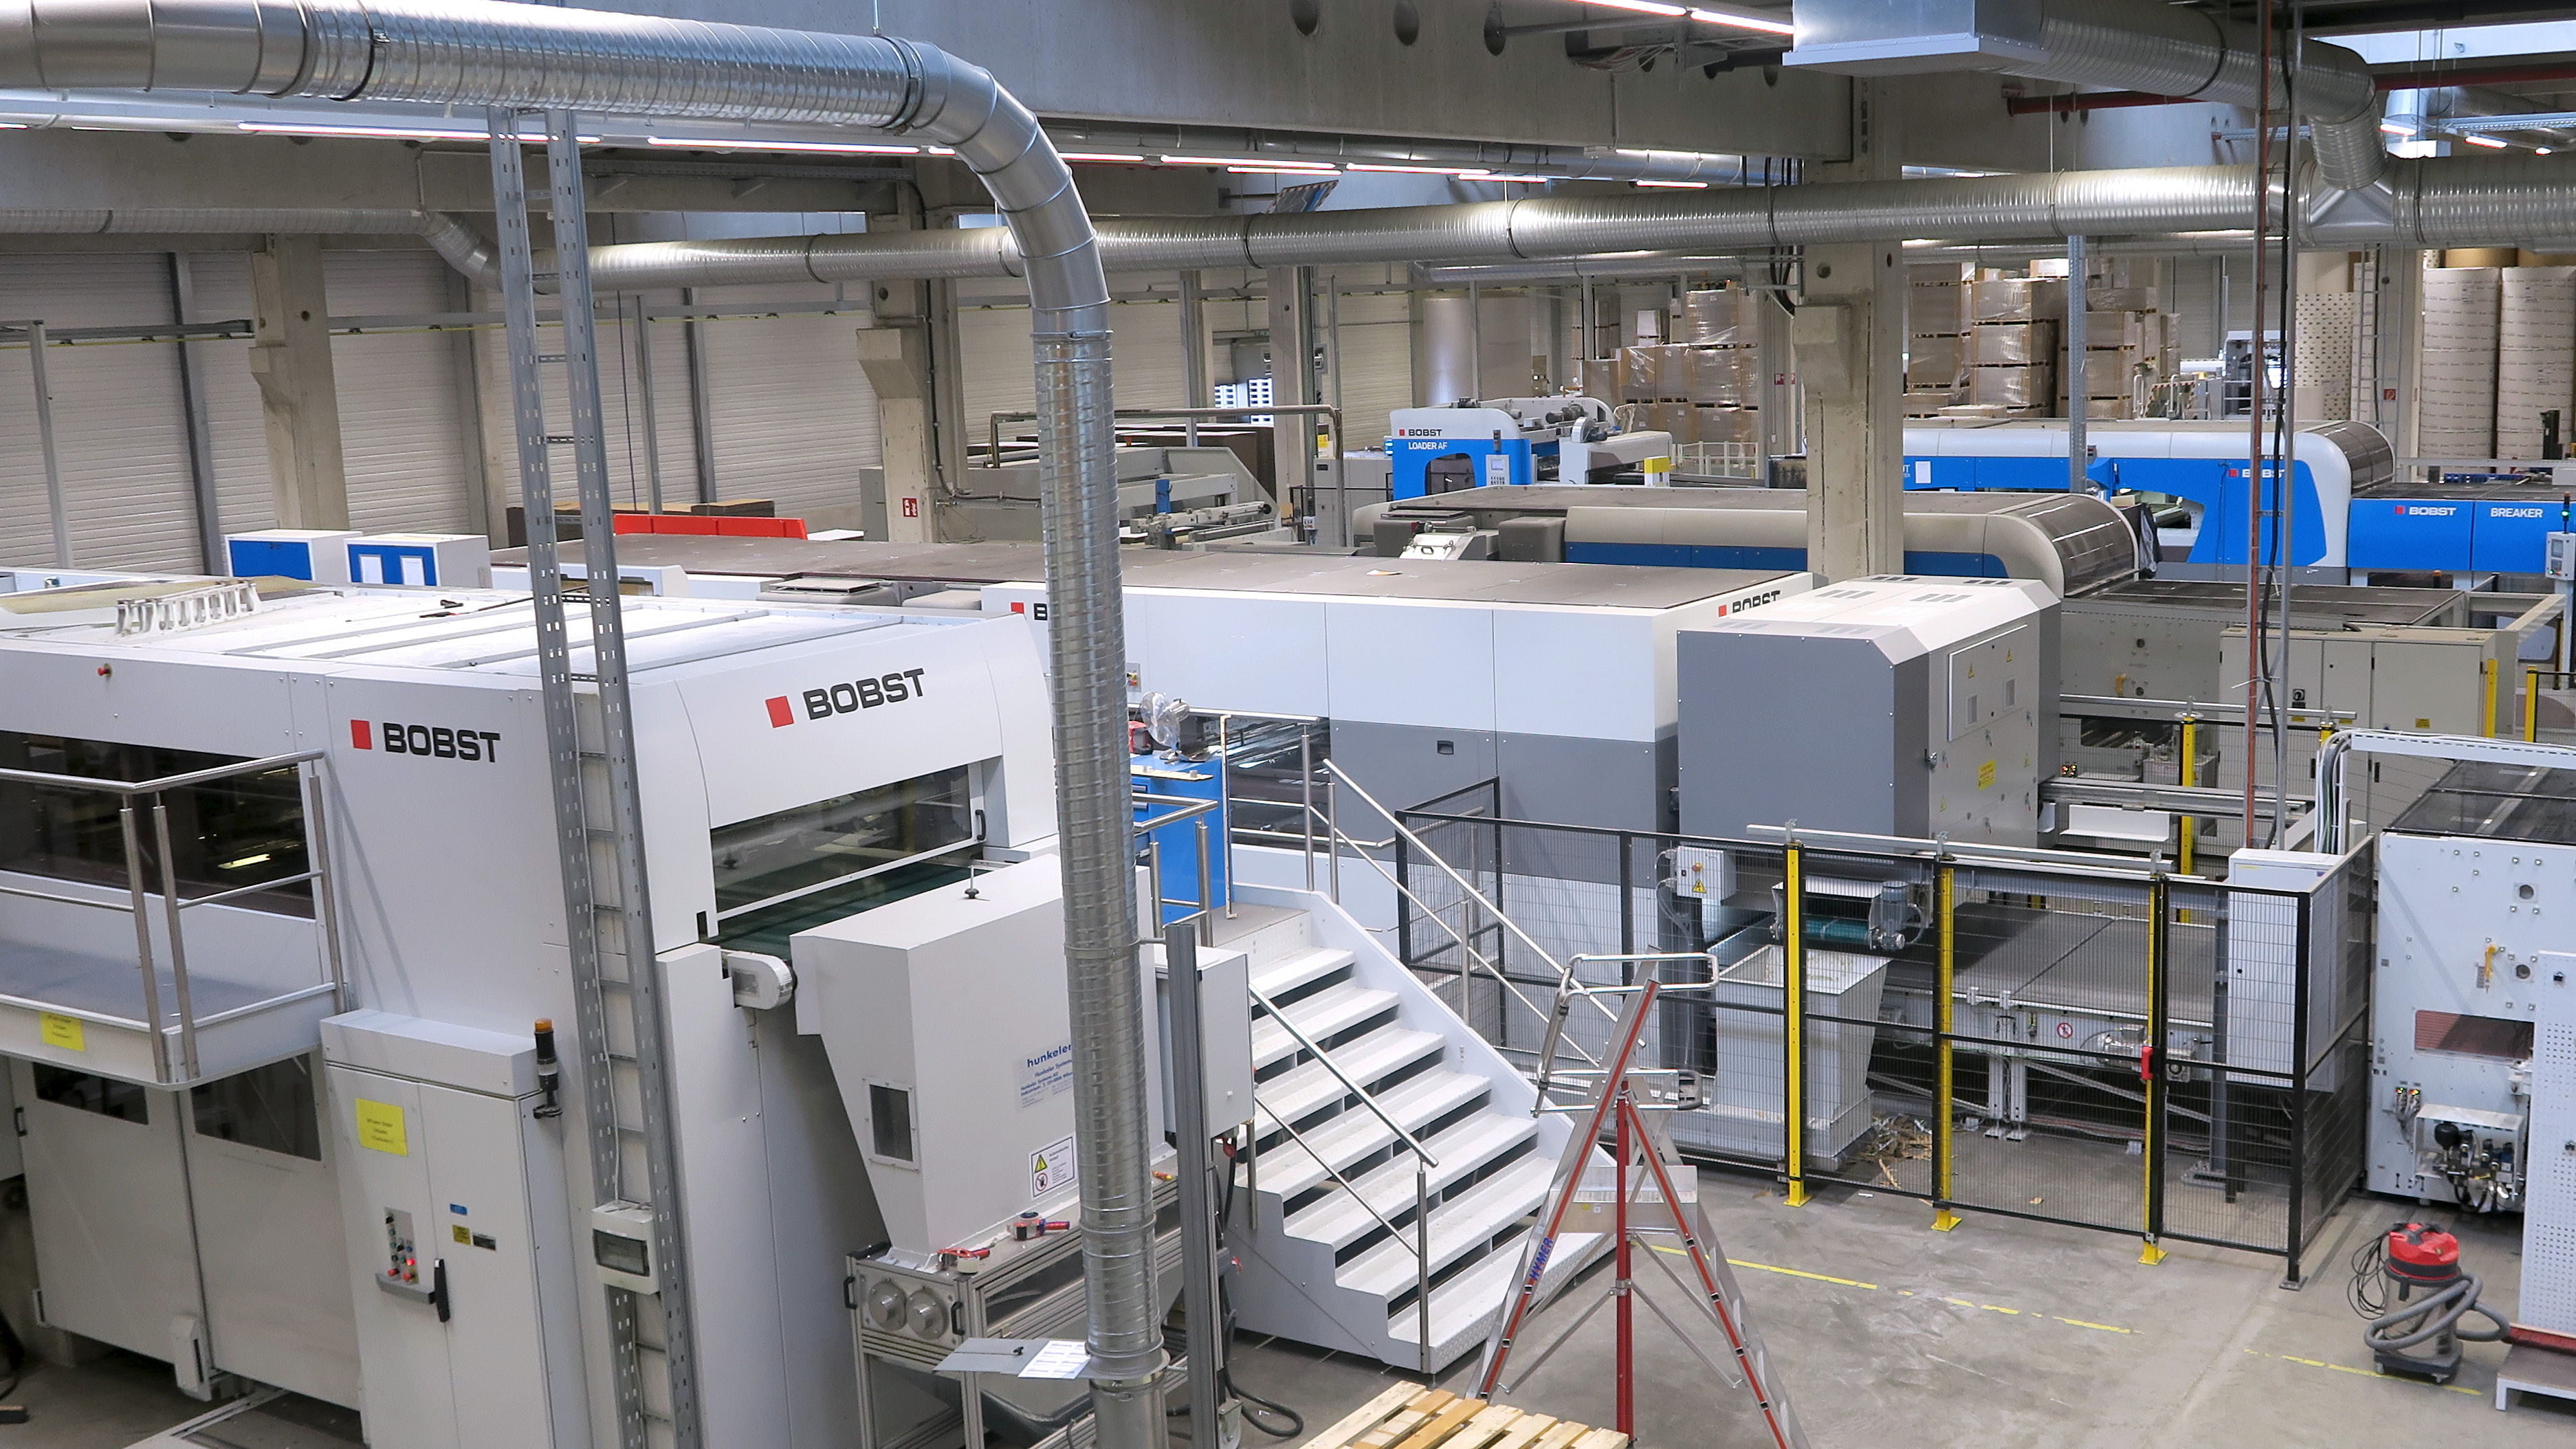 The production floor of packit! is equipped with a whole range of BOBST die-cutters